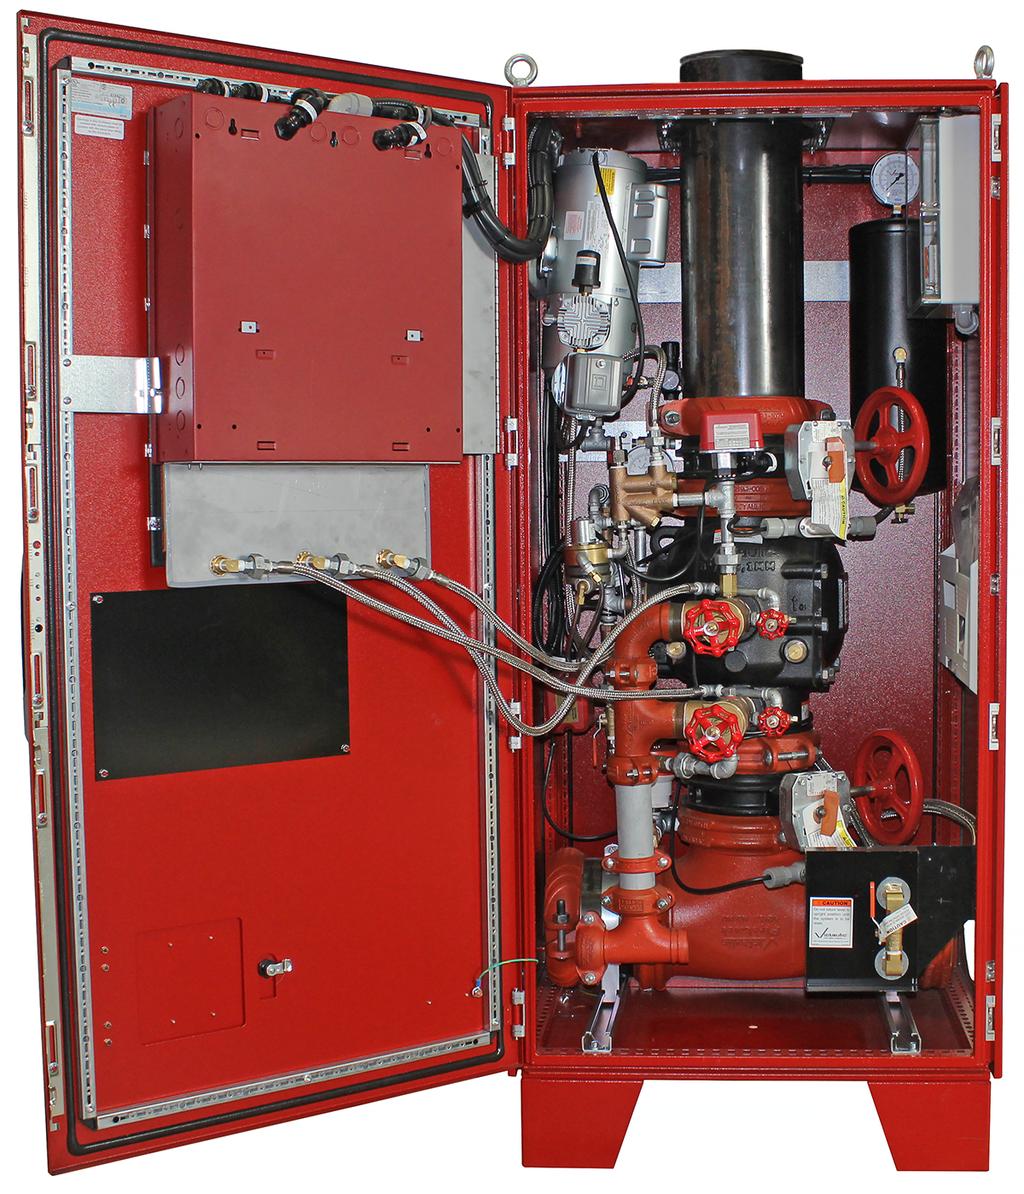 I-745 / Series 745 FireLock Fire-Pac for FireLock NXT Valves / Installation, Maintenance, Testing, and Wiring Manual INTERNAL VIEW FIRE-PA ABINET ONTAINING 2 1/2 8-INH/73.0 219.